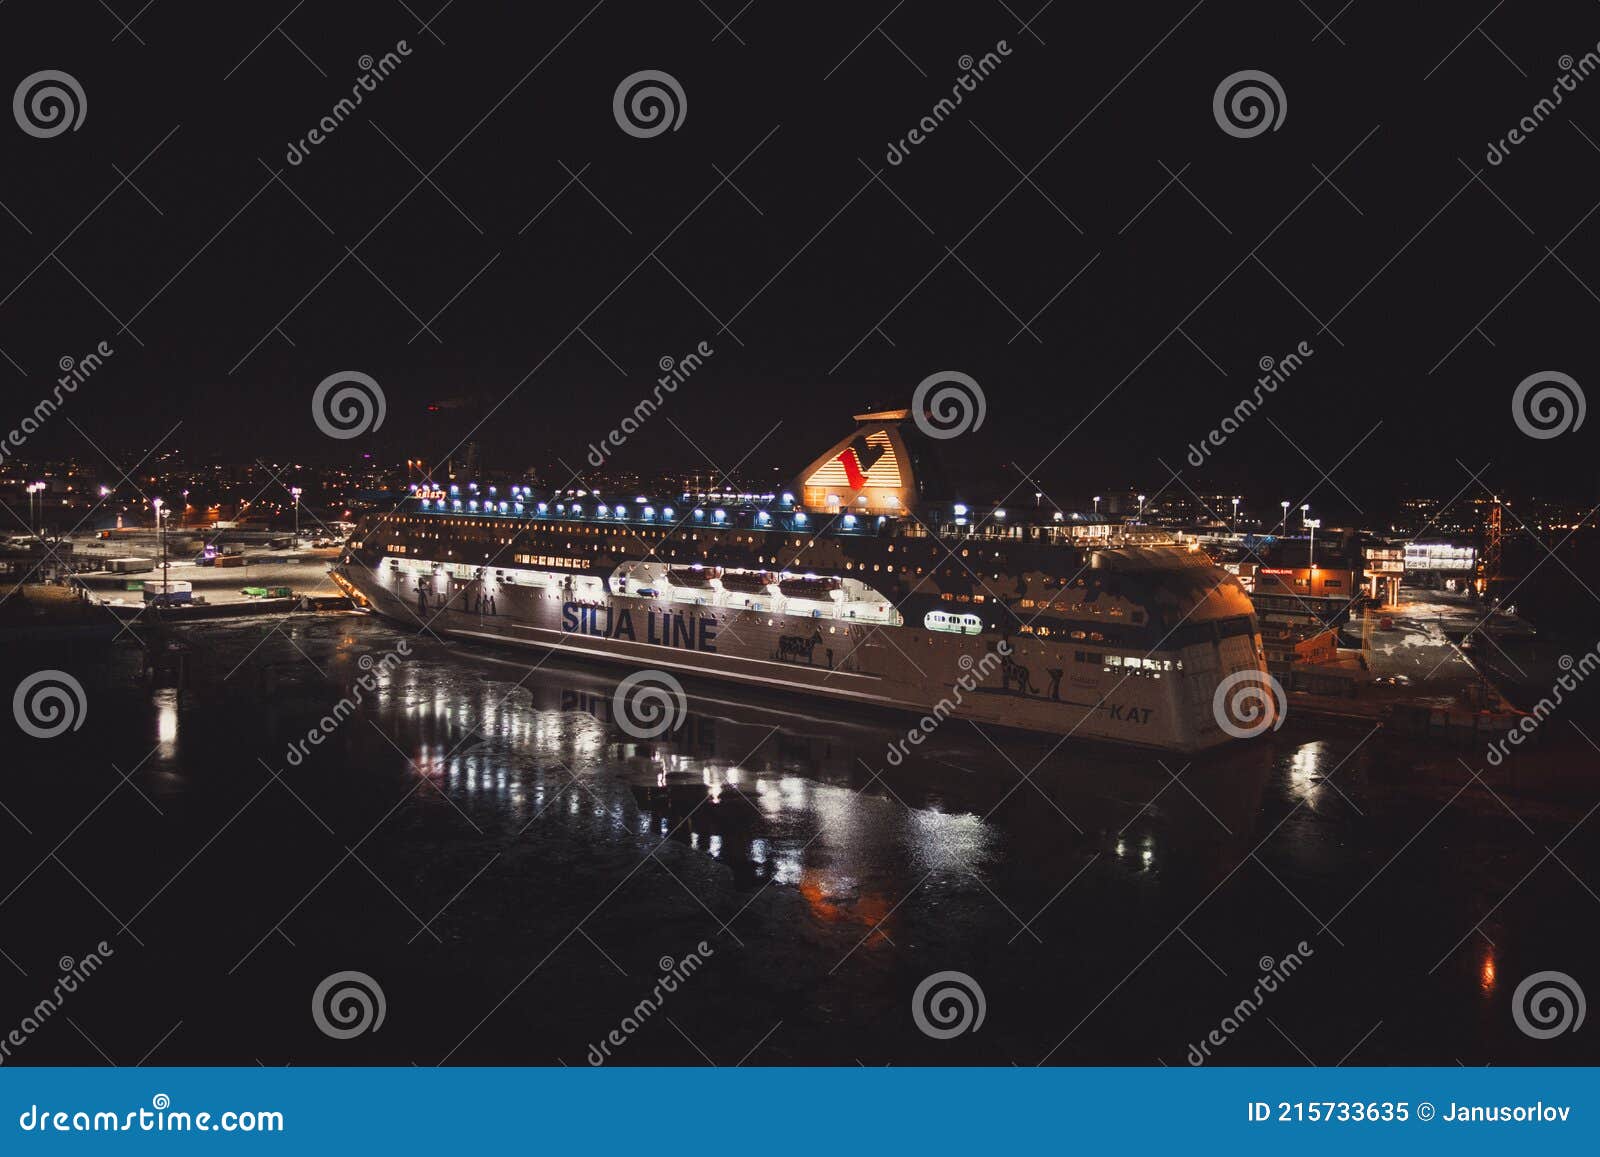 Turku Finland Silja Line S MS Galaxy in the Port at Night Editorial Image -  Image of finland, quay: 215733635